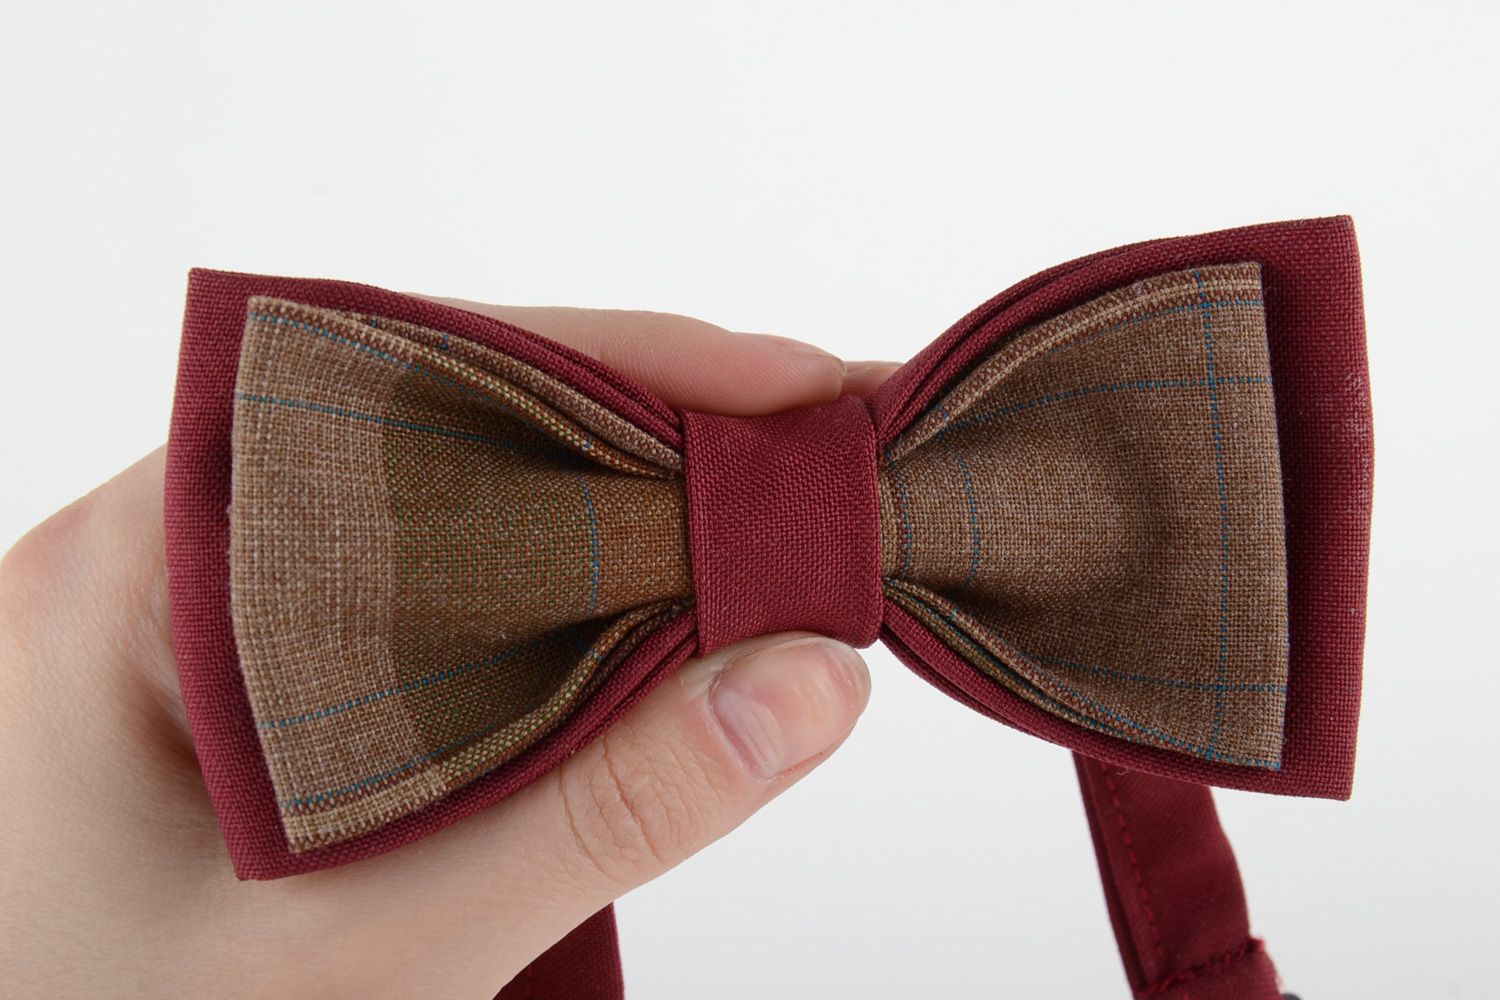 Handmade stylish bow tie sewn of costume fabric of dark red and brown colors photo 5